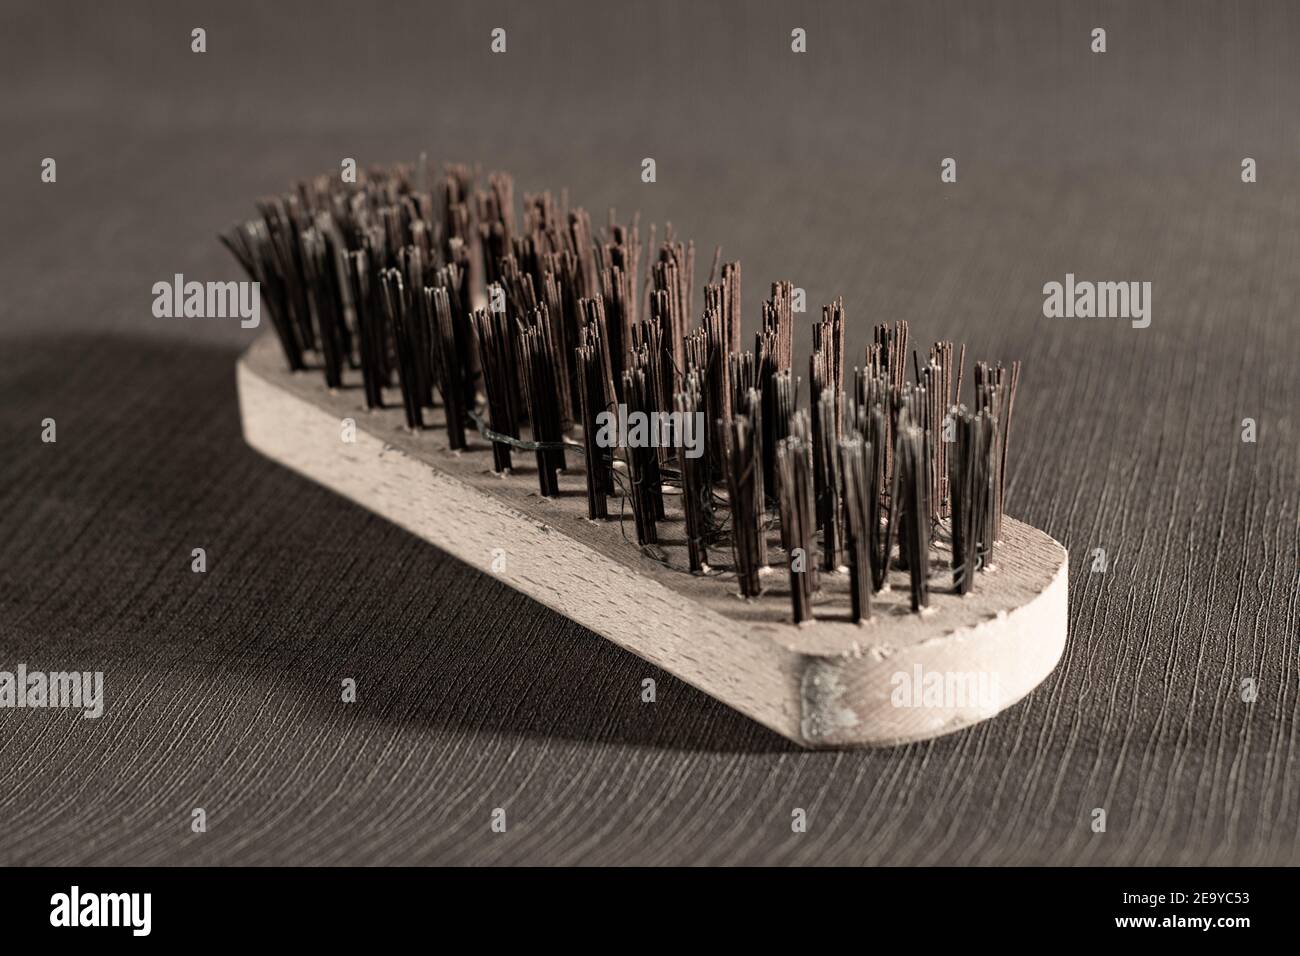 Steel brush used for metal works and metal painting preparation Stock Photo